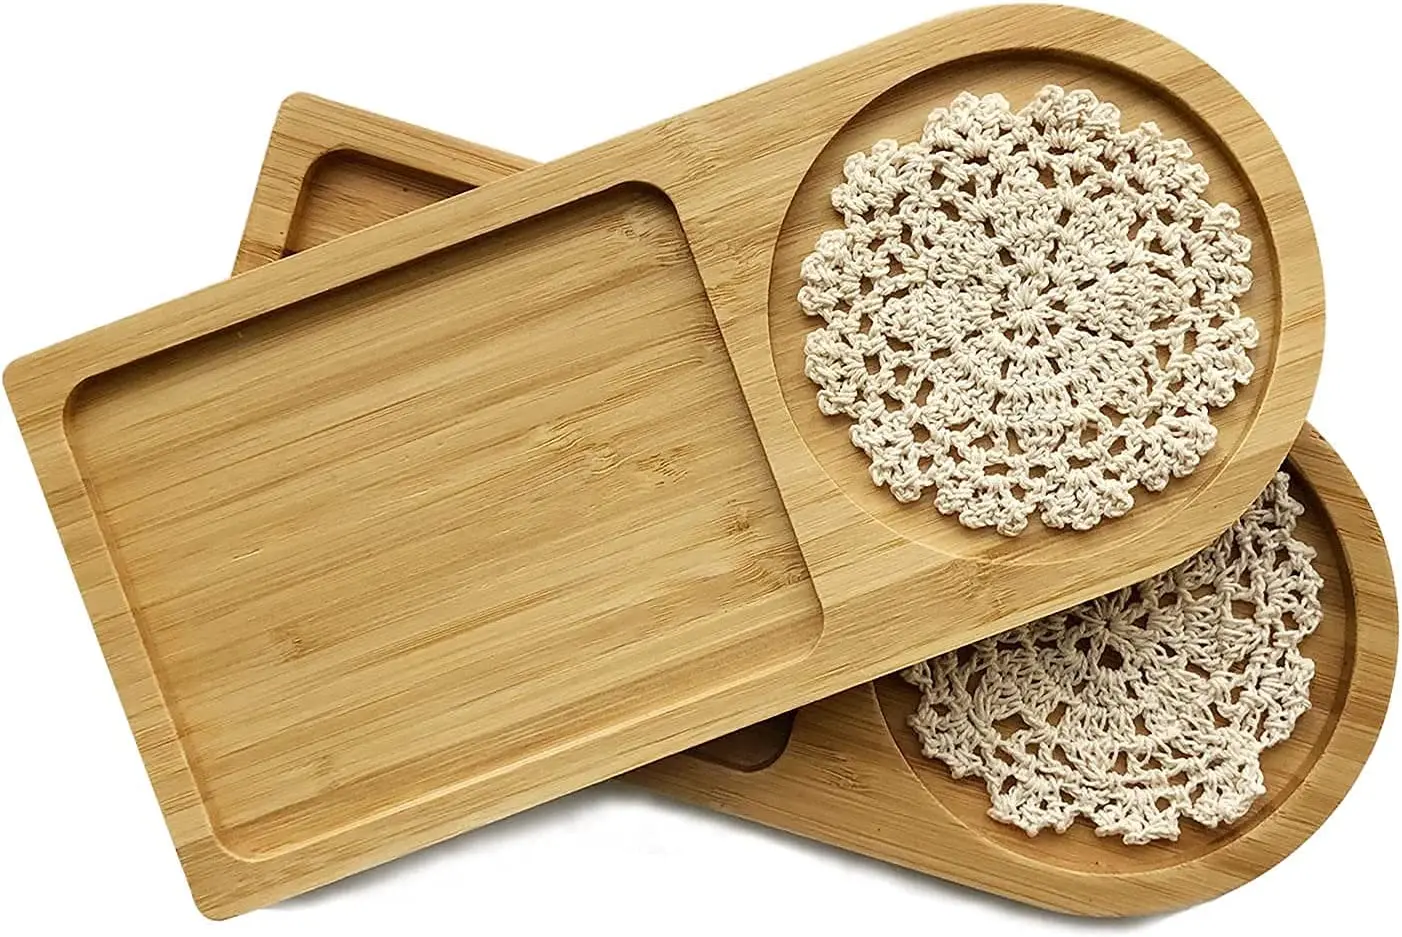 Small Natural Bamboo Serving Platter Rectangular Wooden Tray with Coaster Drink Trays for Coffee Tea Dessert Table